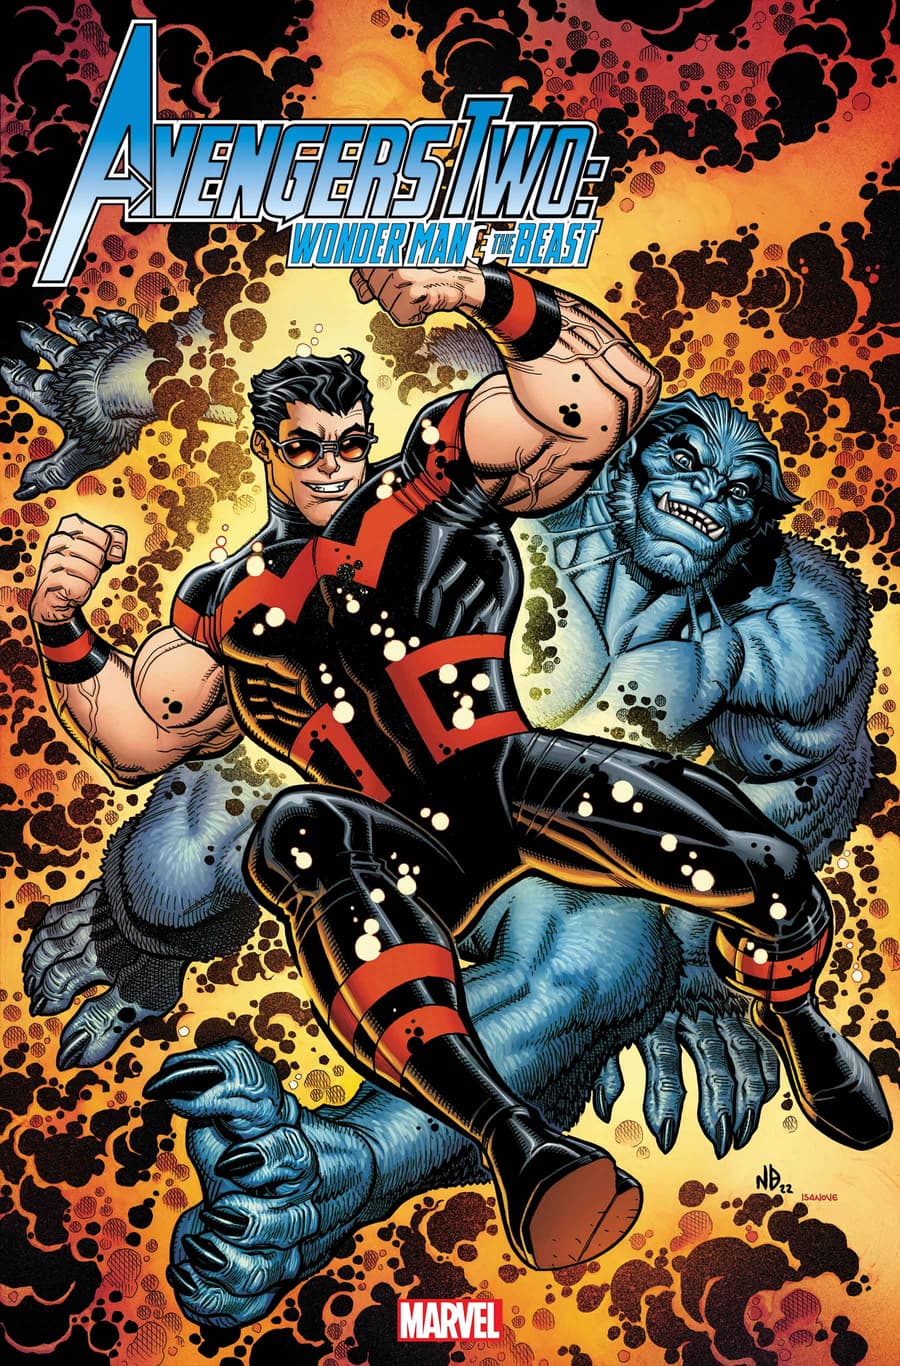 AVENGERS TWO: WONDER MAN AND BEAST – MARVEL TALES #1 Cover by NICK BRADSHAW